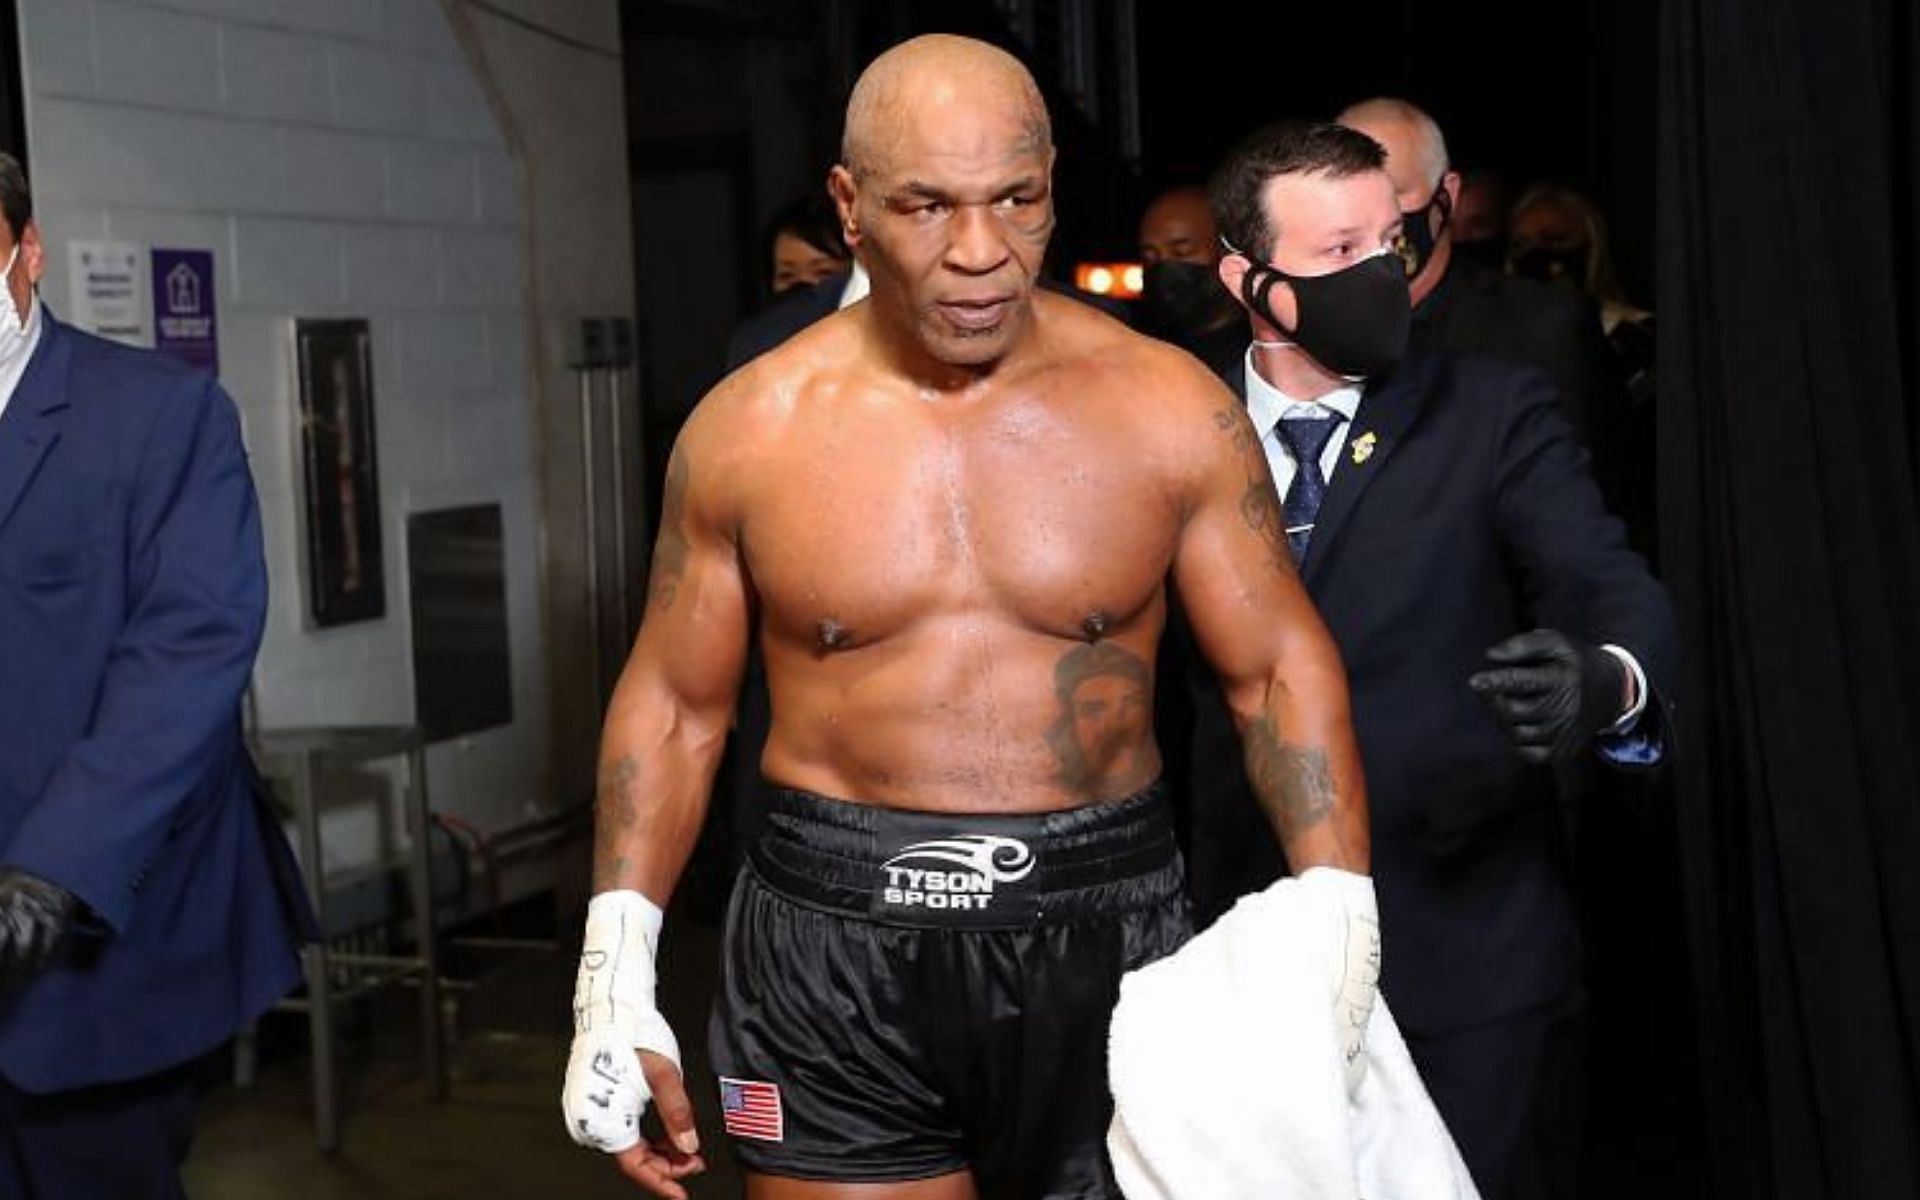 Mike Tyson was one of the most feared boxers on the planet